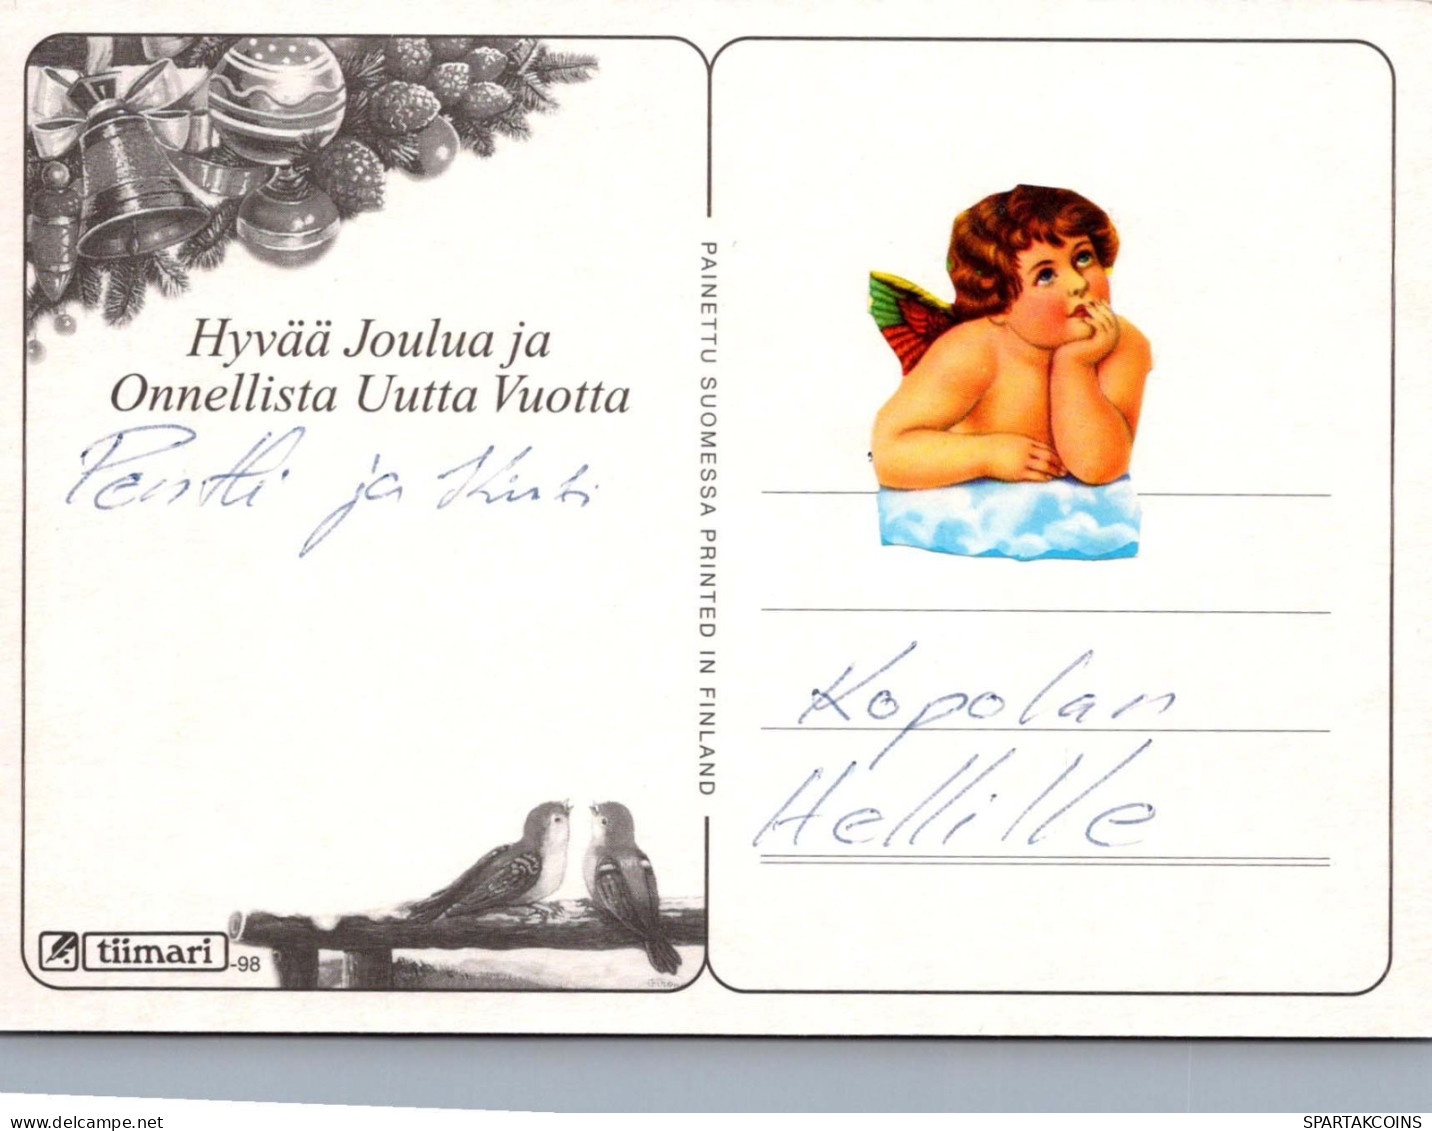 Buon Anno Natale UCCELLO Vintage Cartolina CPSM #PBM706.A - New Year